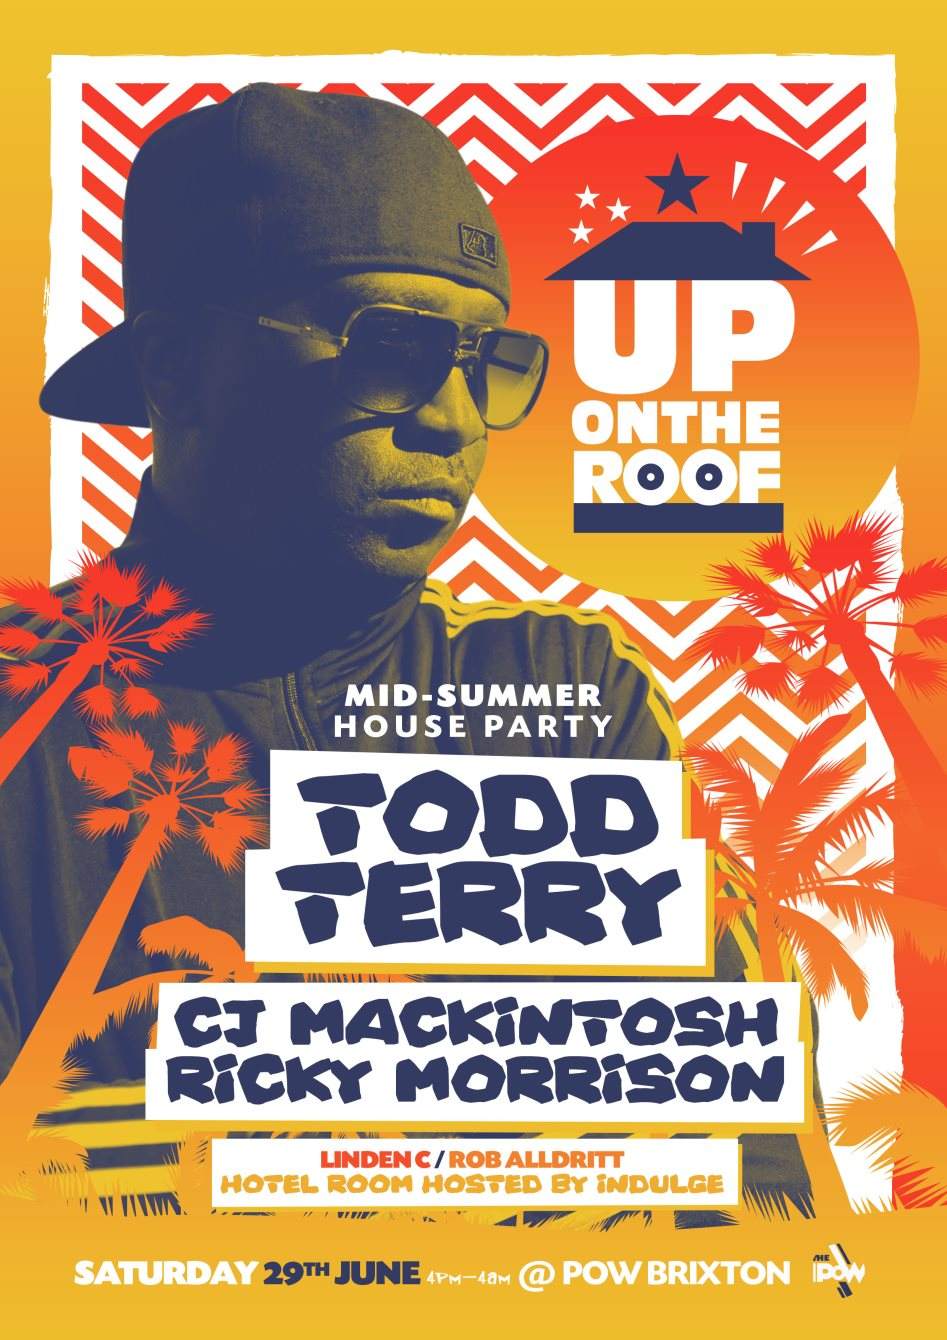 Up On The Roof's Mid-Summer House Party with Todd Terry - Página frontal